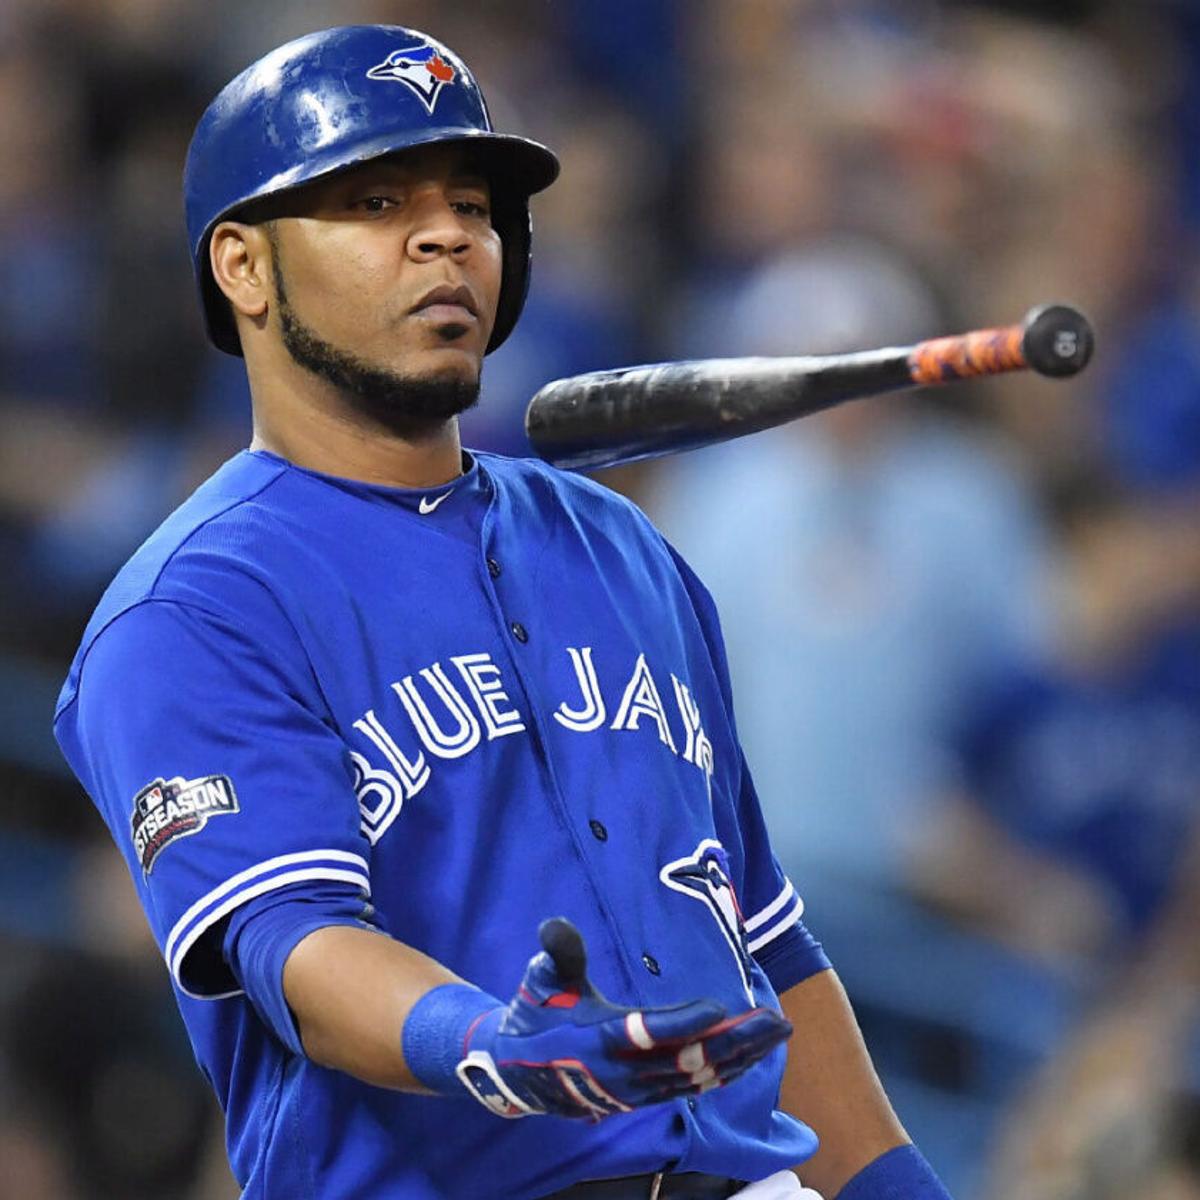 Blue Jays need to make room for Edwin Encarnacion: Griffin